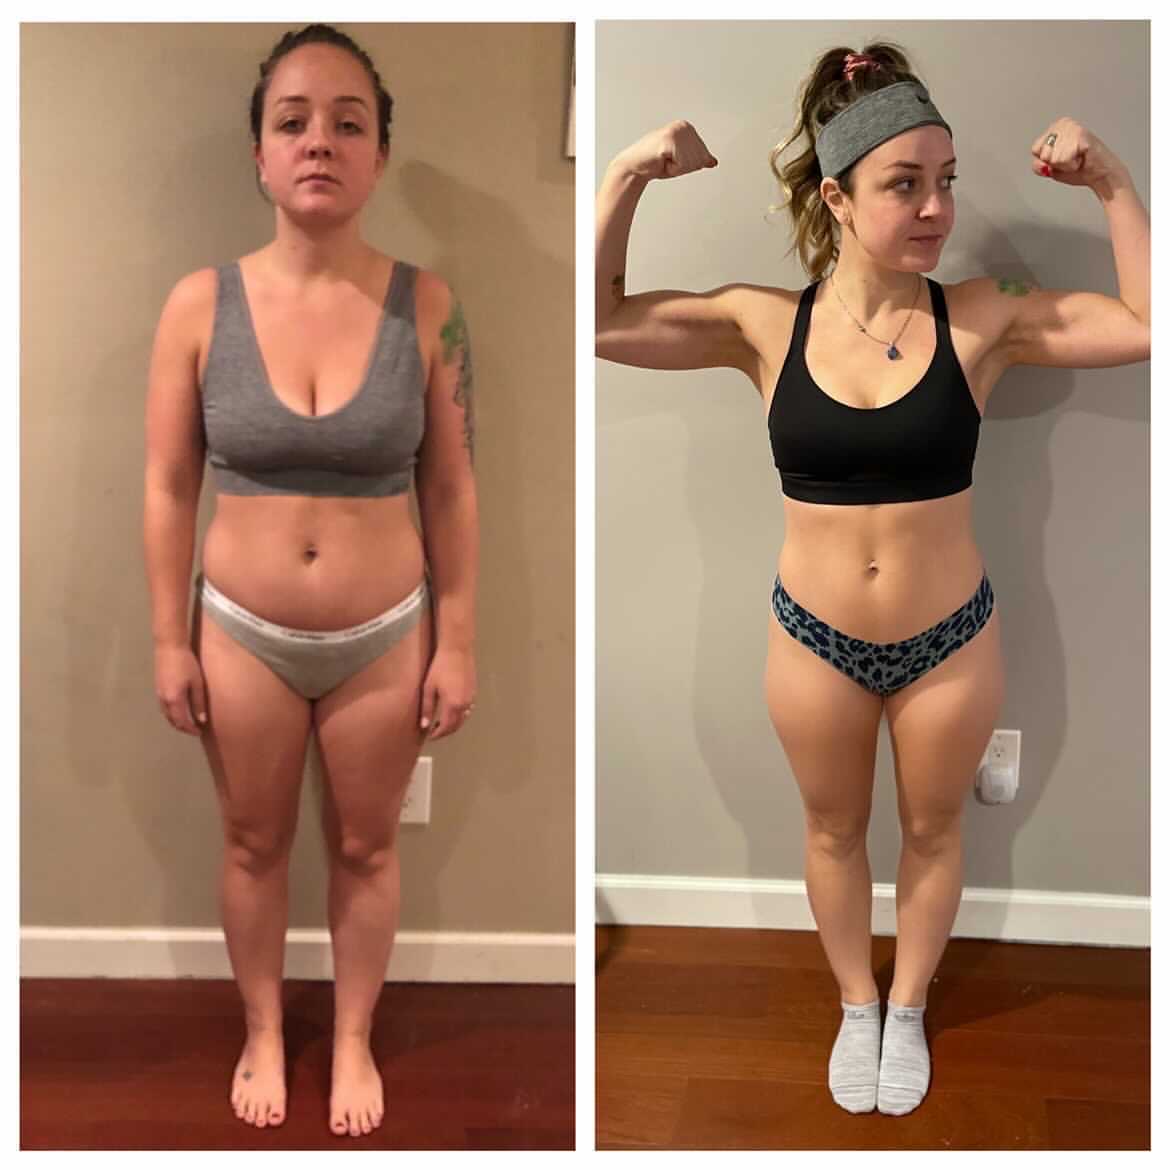 20 year old female weight loss and fitness transformation before and after